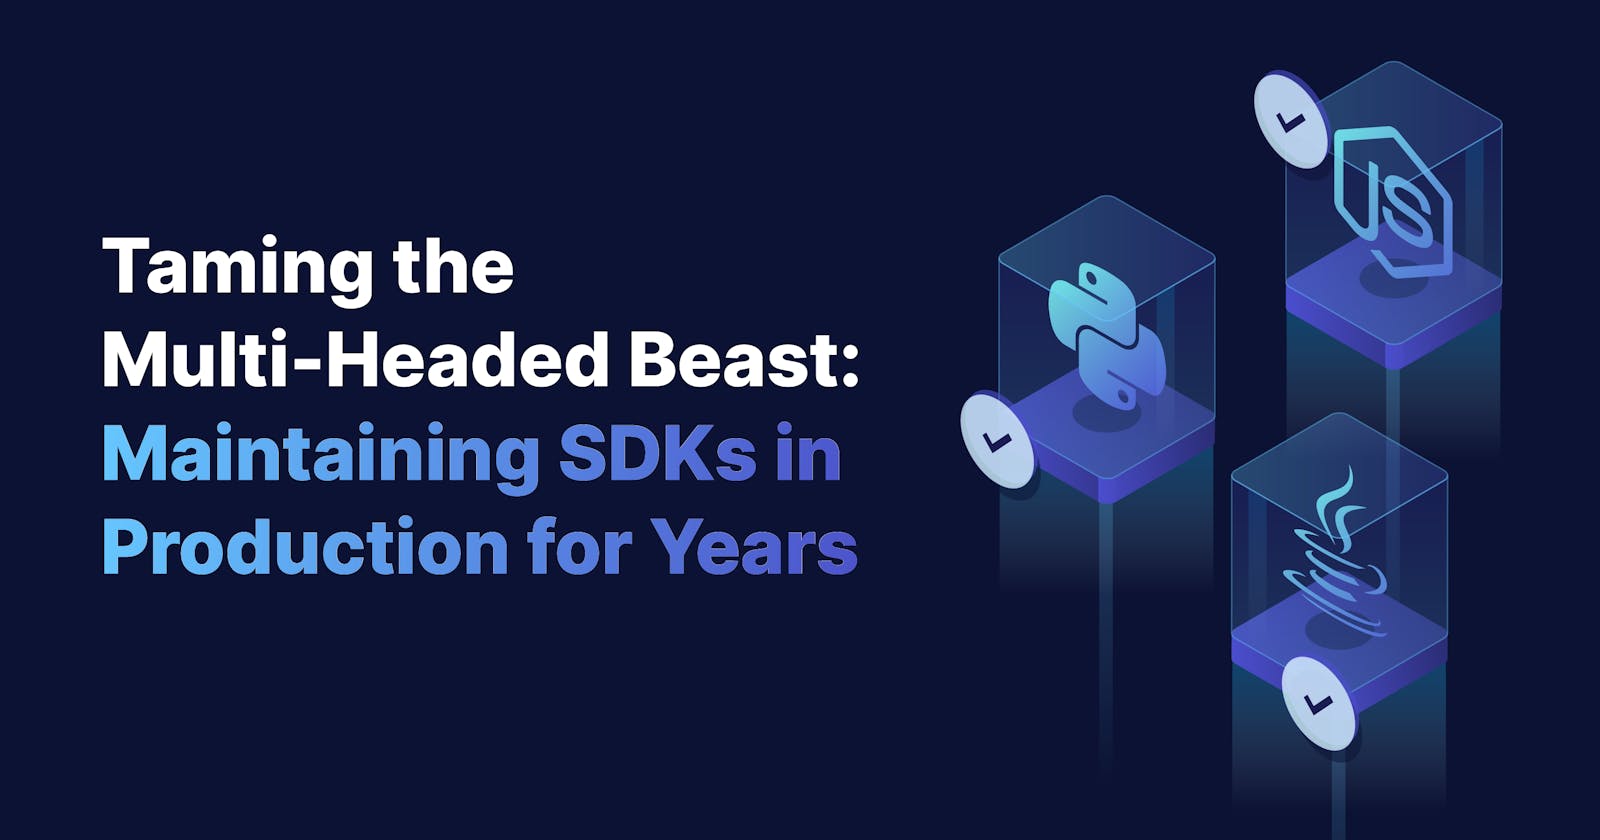 Taming the Multi-Headed Beast: Maintaining SDKs in Production for Years